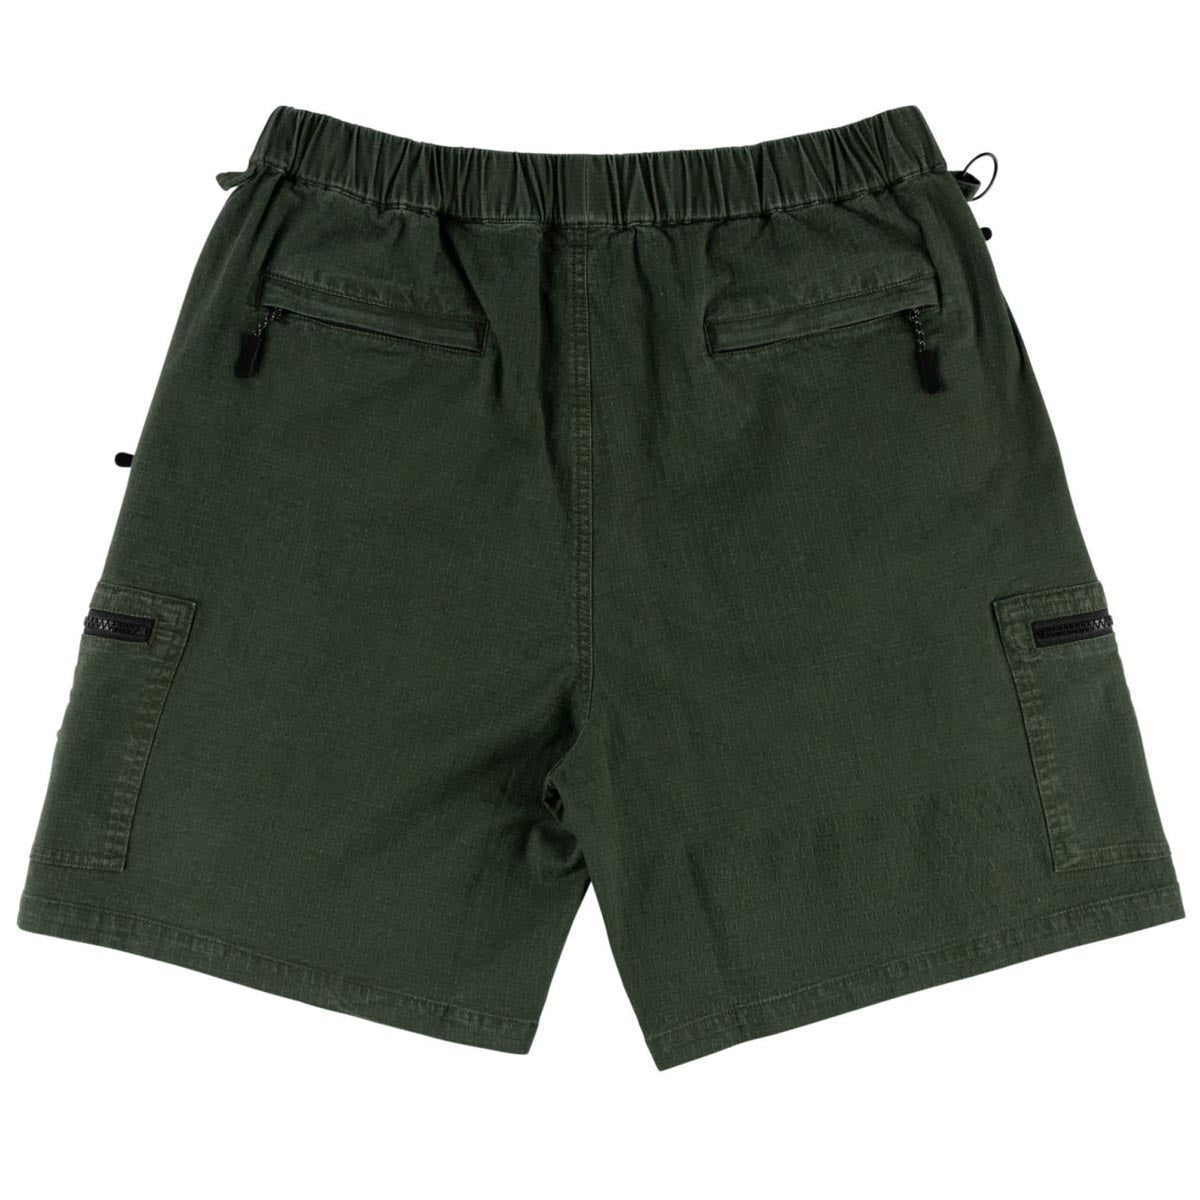 Welcome Summit Nylon Ripstop Shorts - Ivy image 2